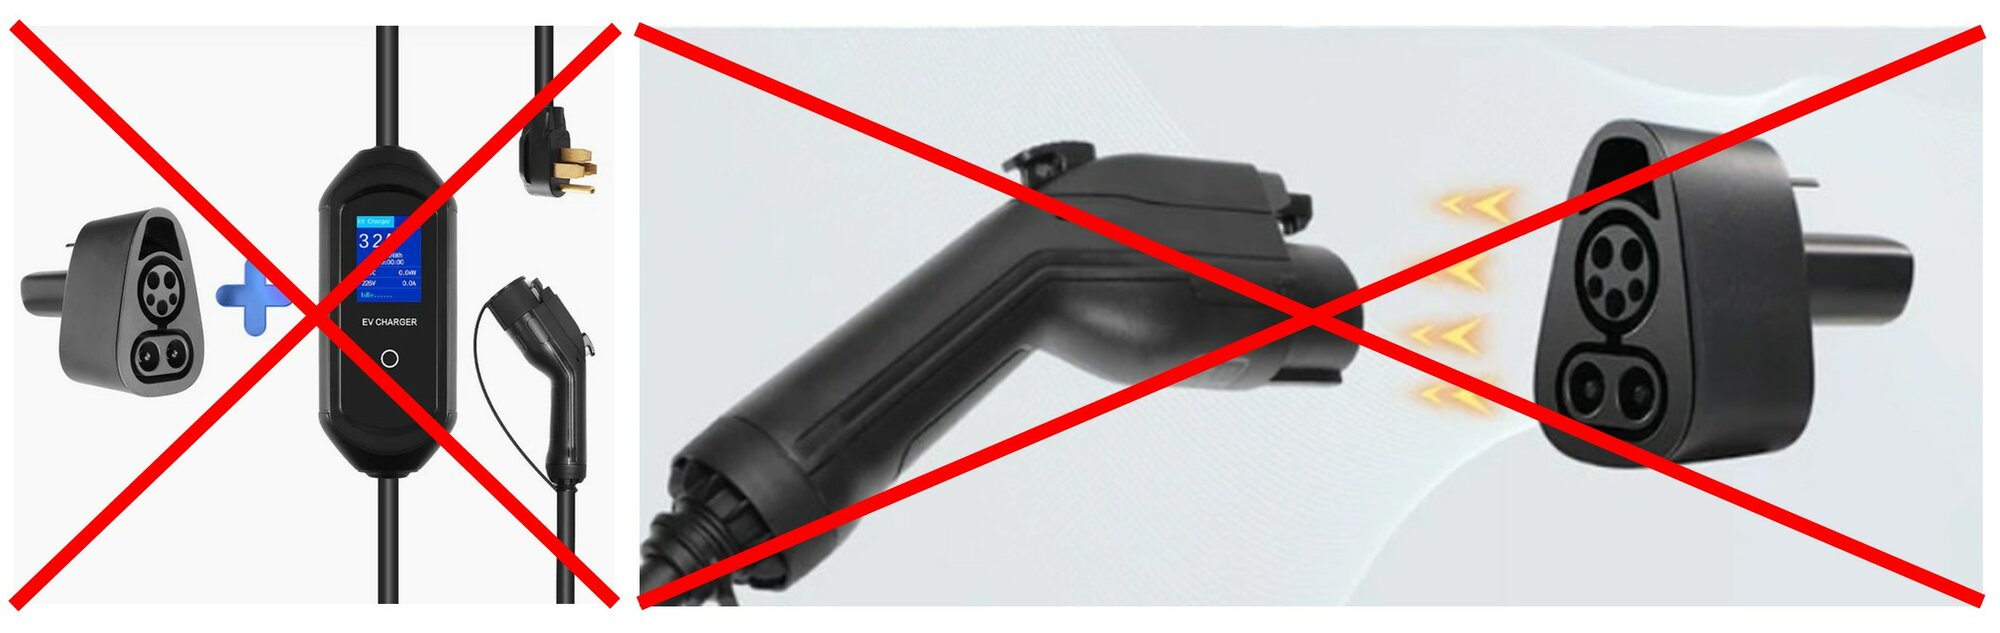 Don't be misled--CCS1 adapters are NOT necessary for AC charging.